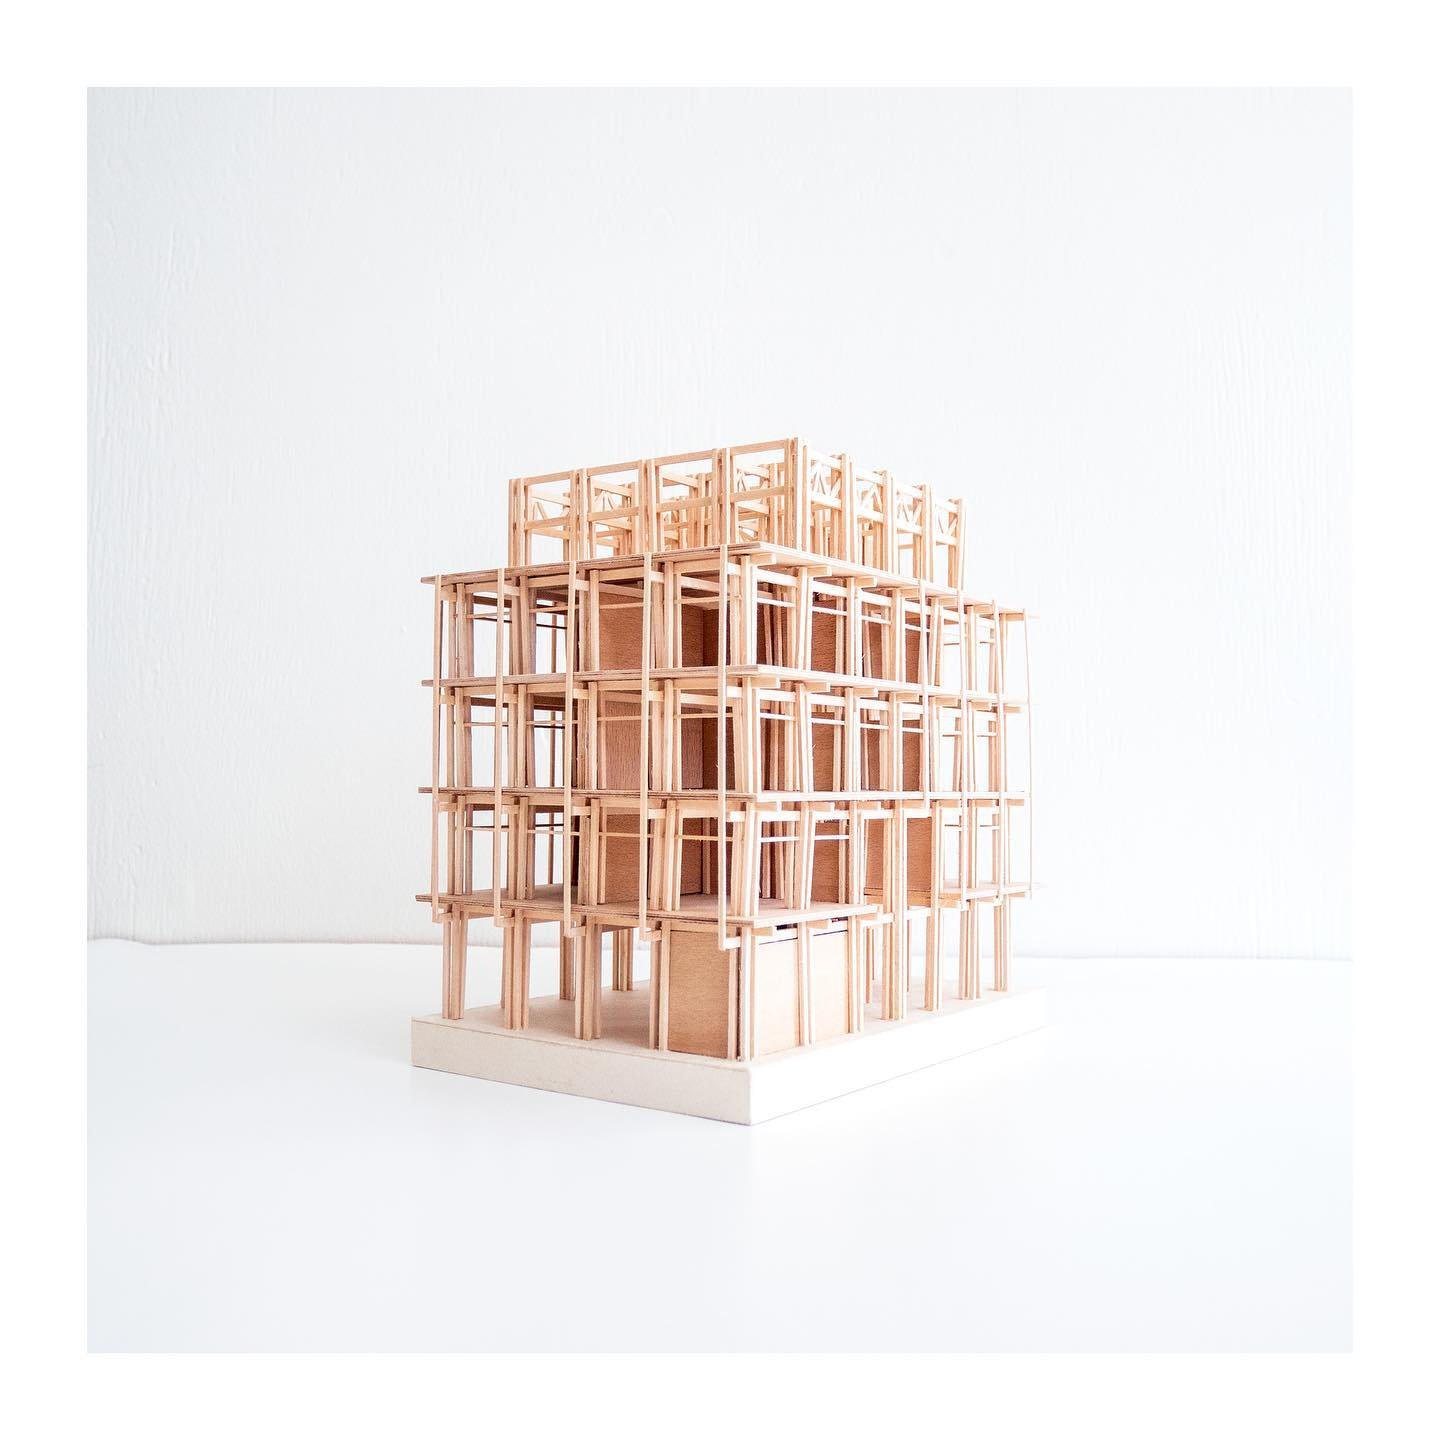 The project &lsquo;Aer - The Act of Breathing&rsquo; takes its name from the Ancient Greek word for air (aḗr). 
⠀⠀⠀⠀⠀⠀⠀⠀⠀
#theactifbreathing #relationalarchitecture #mattersofcare #thresholds #woodarchitecture #architecturemodel #models_architecture 